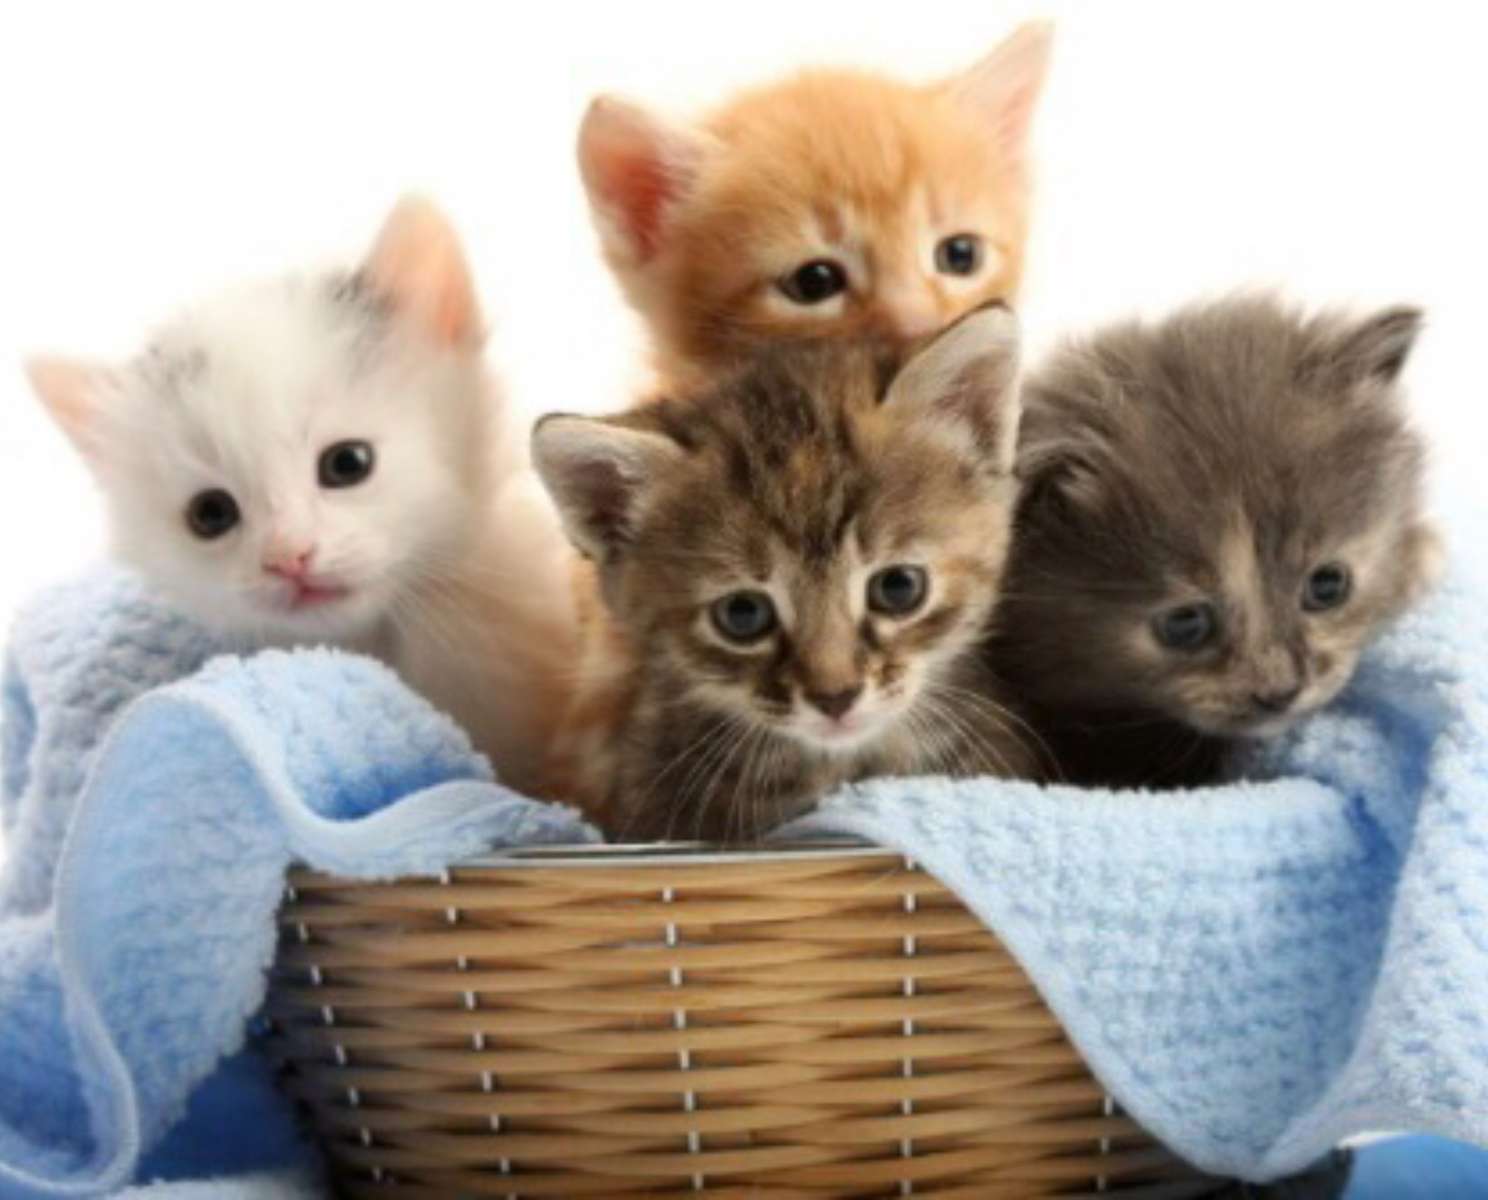 Kittens in a basket❤️❤️❤️❤️❤️❤️ online puzzle